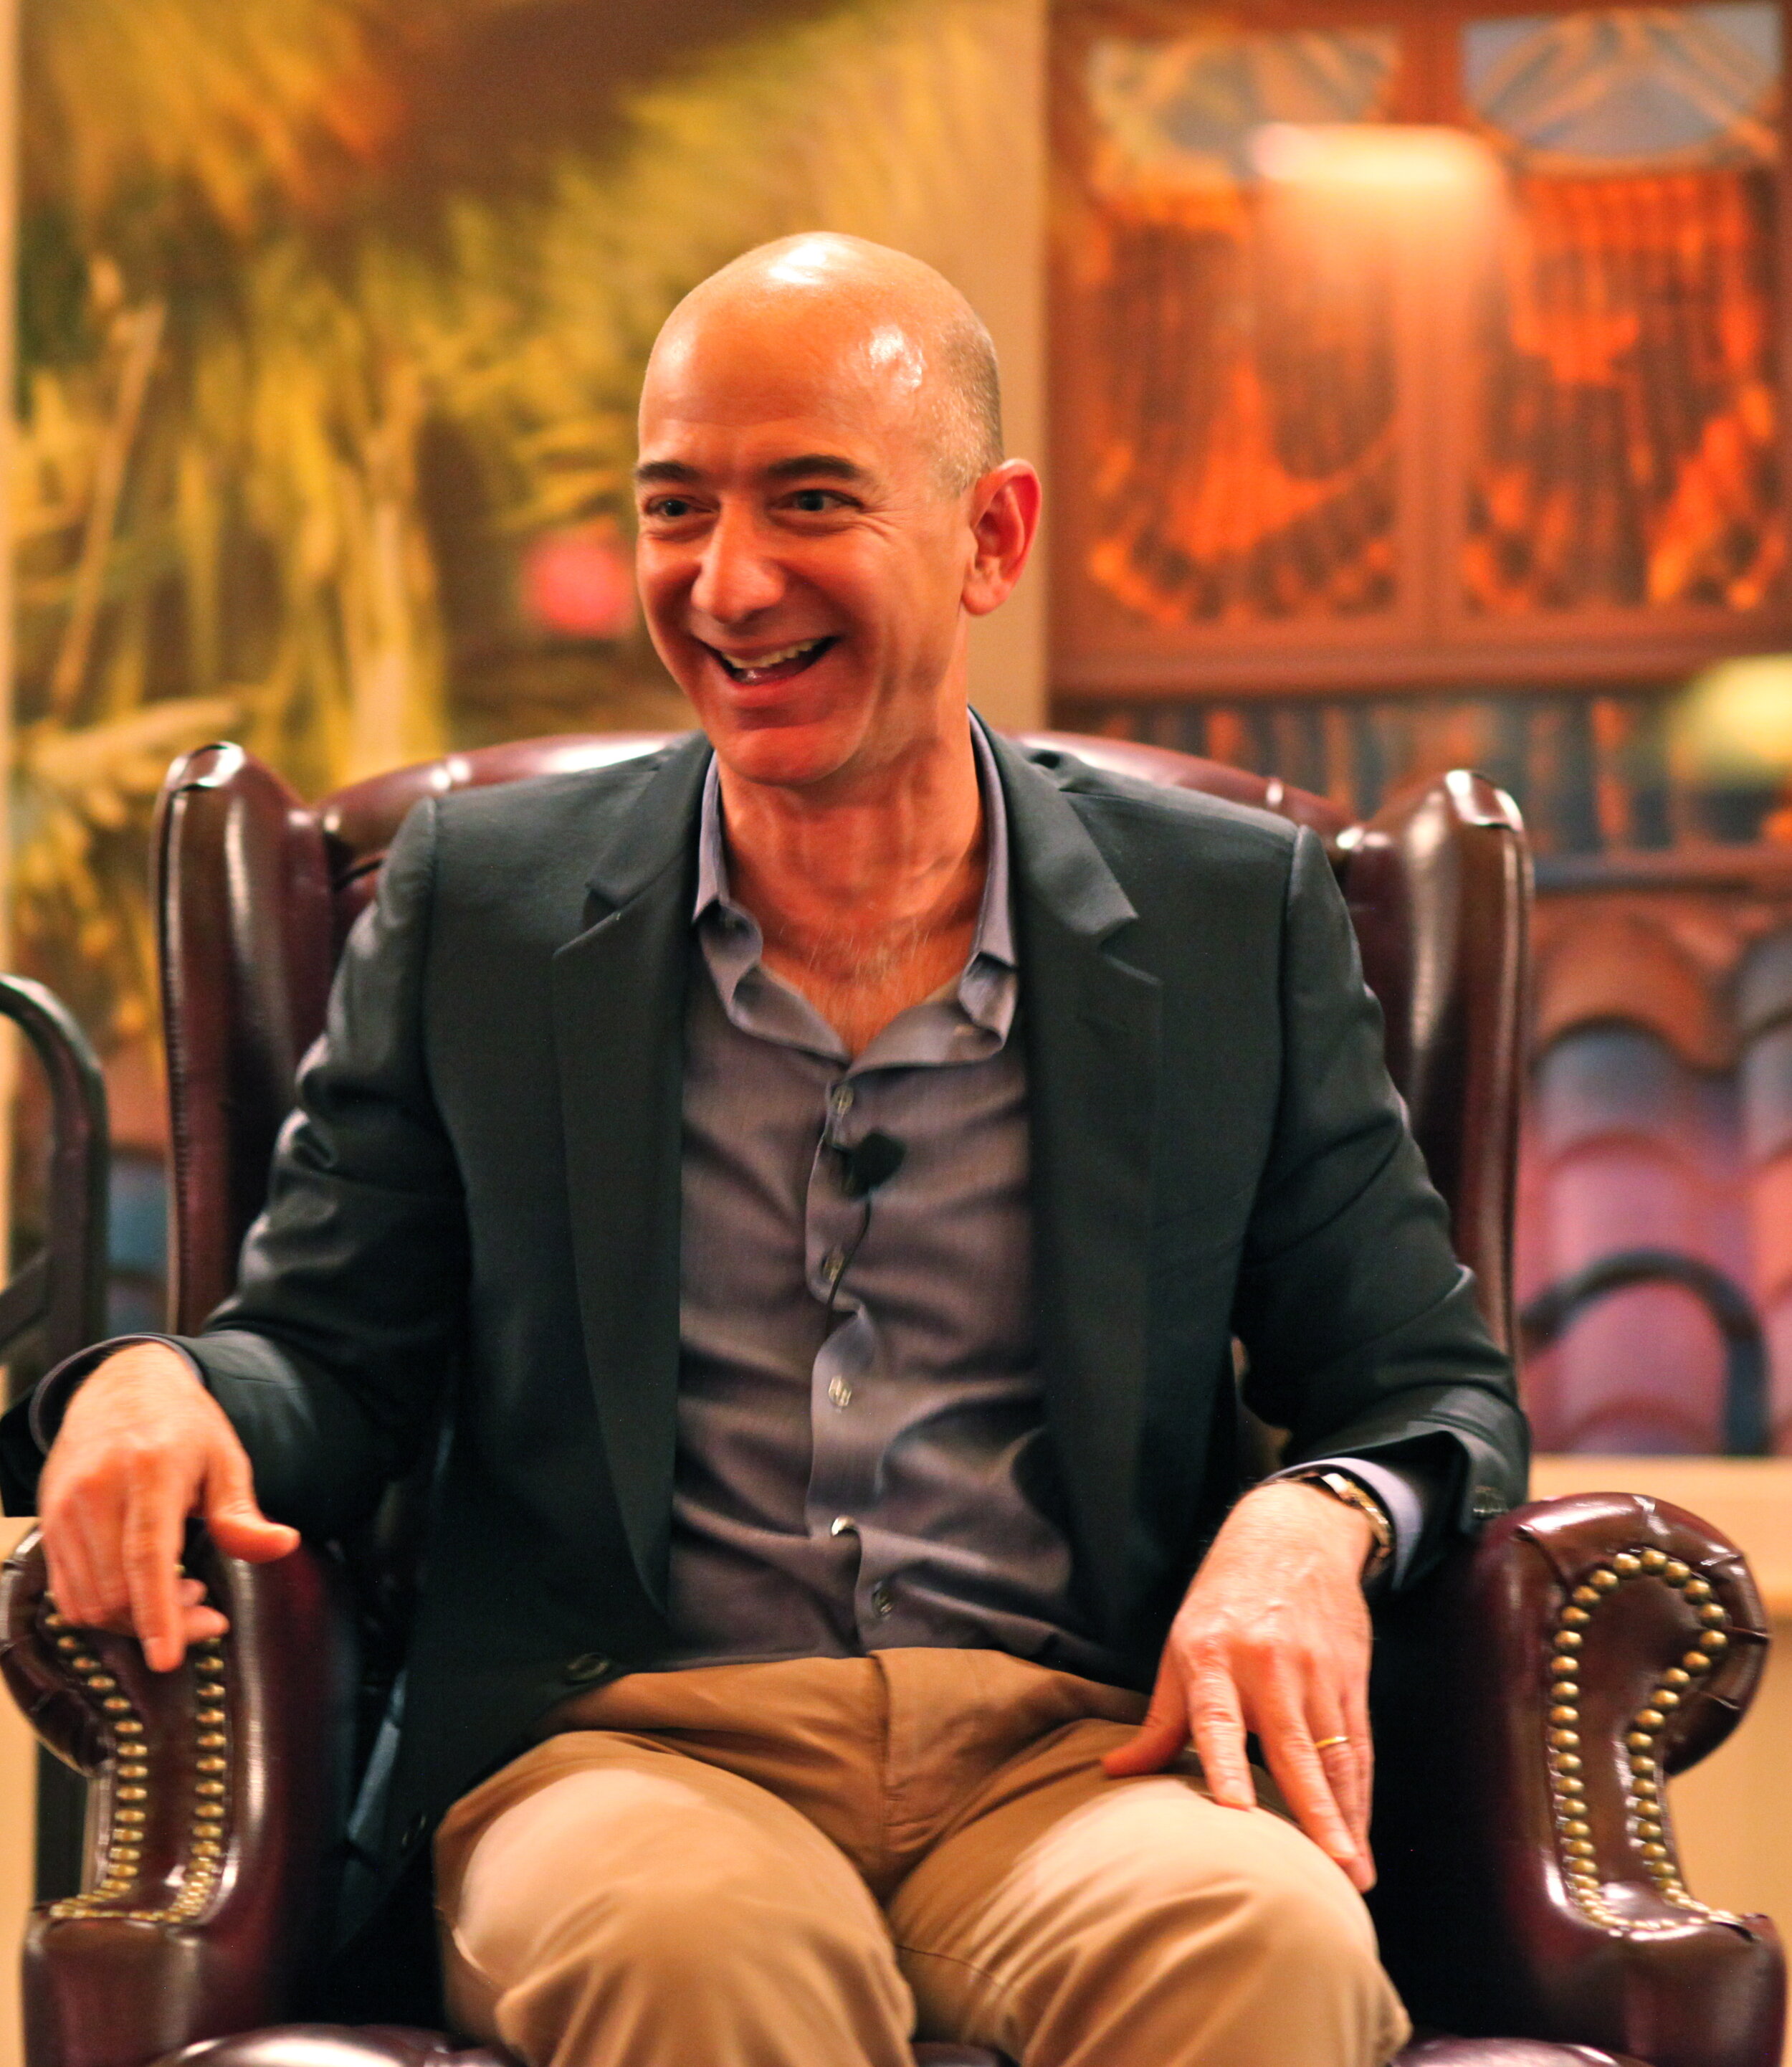 Jeff Bezos Steps Down and Twists His Ankle. He’s Fine Now.